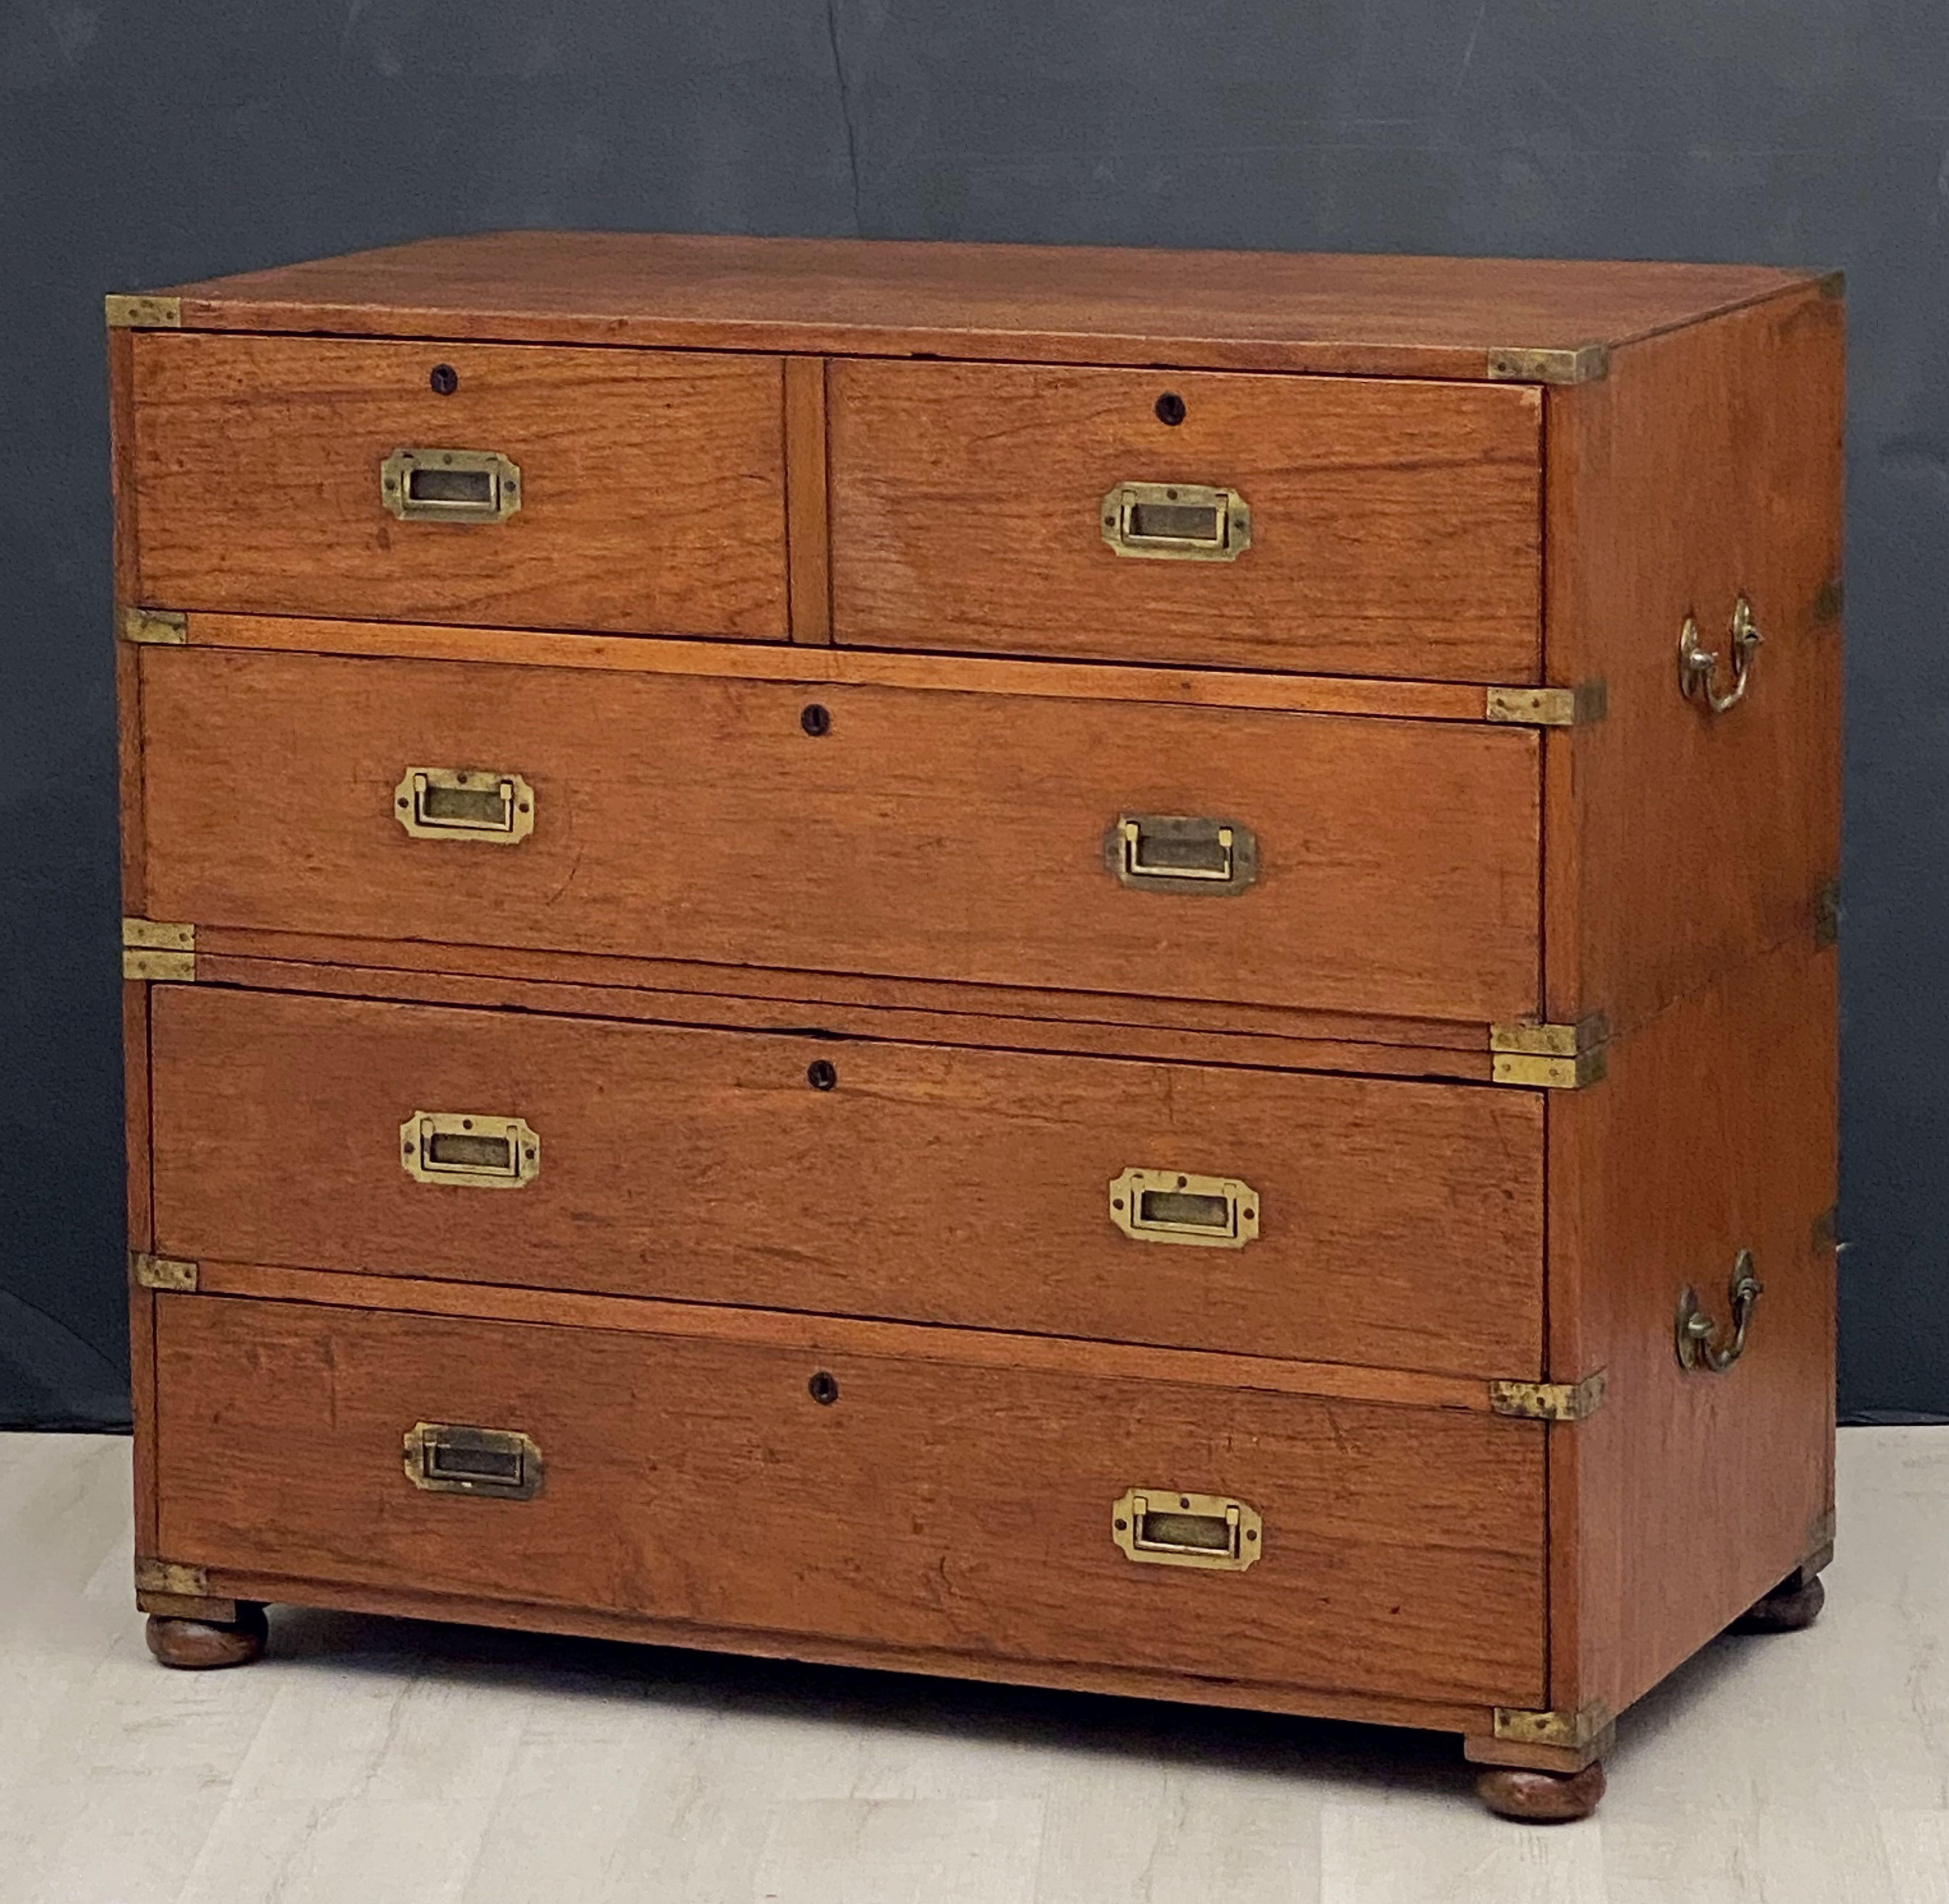 A fine English military officer’s Campaign ware secretary, fashioned as a chest of drawers, featuring a teak exterior, showing two short drawers over three long drawers. The top drawer with a faux facade of two short drawers, opening to a secretary